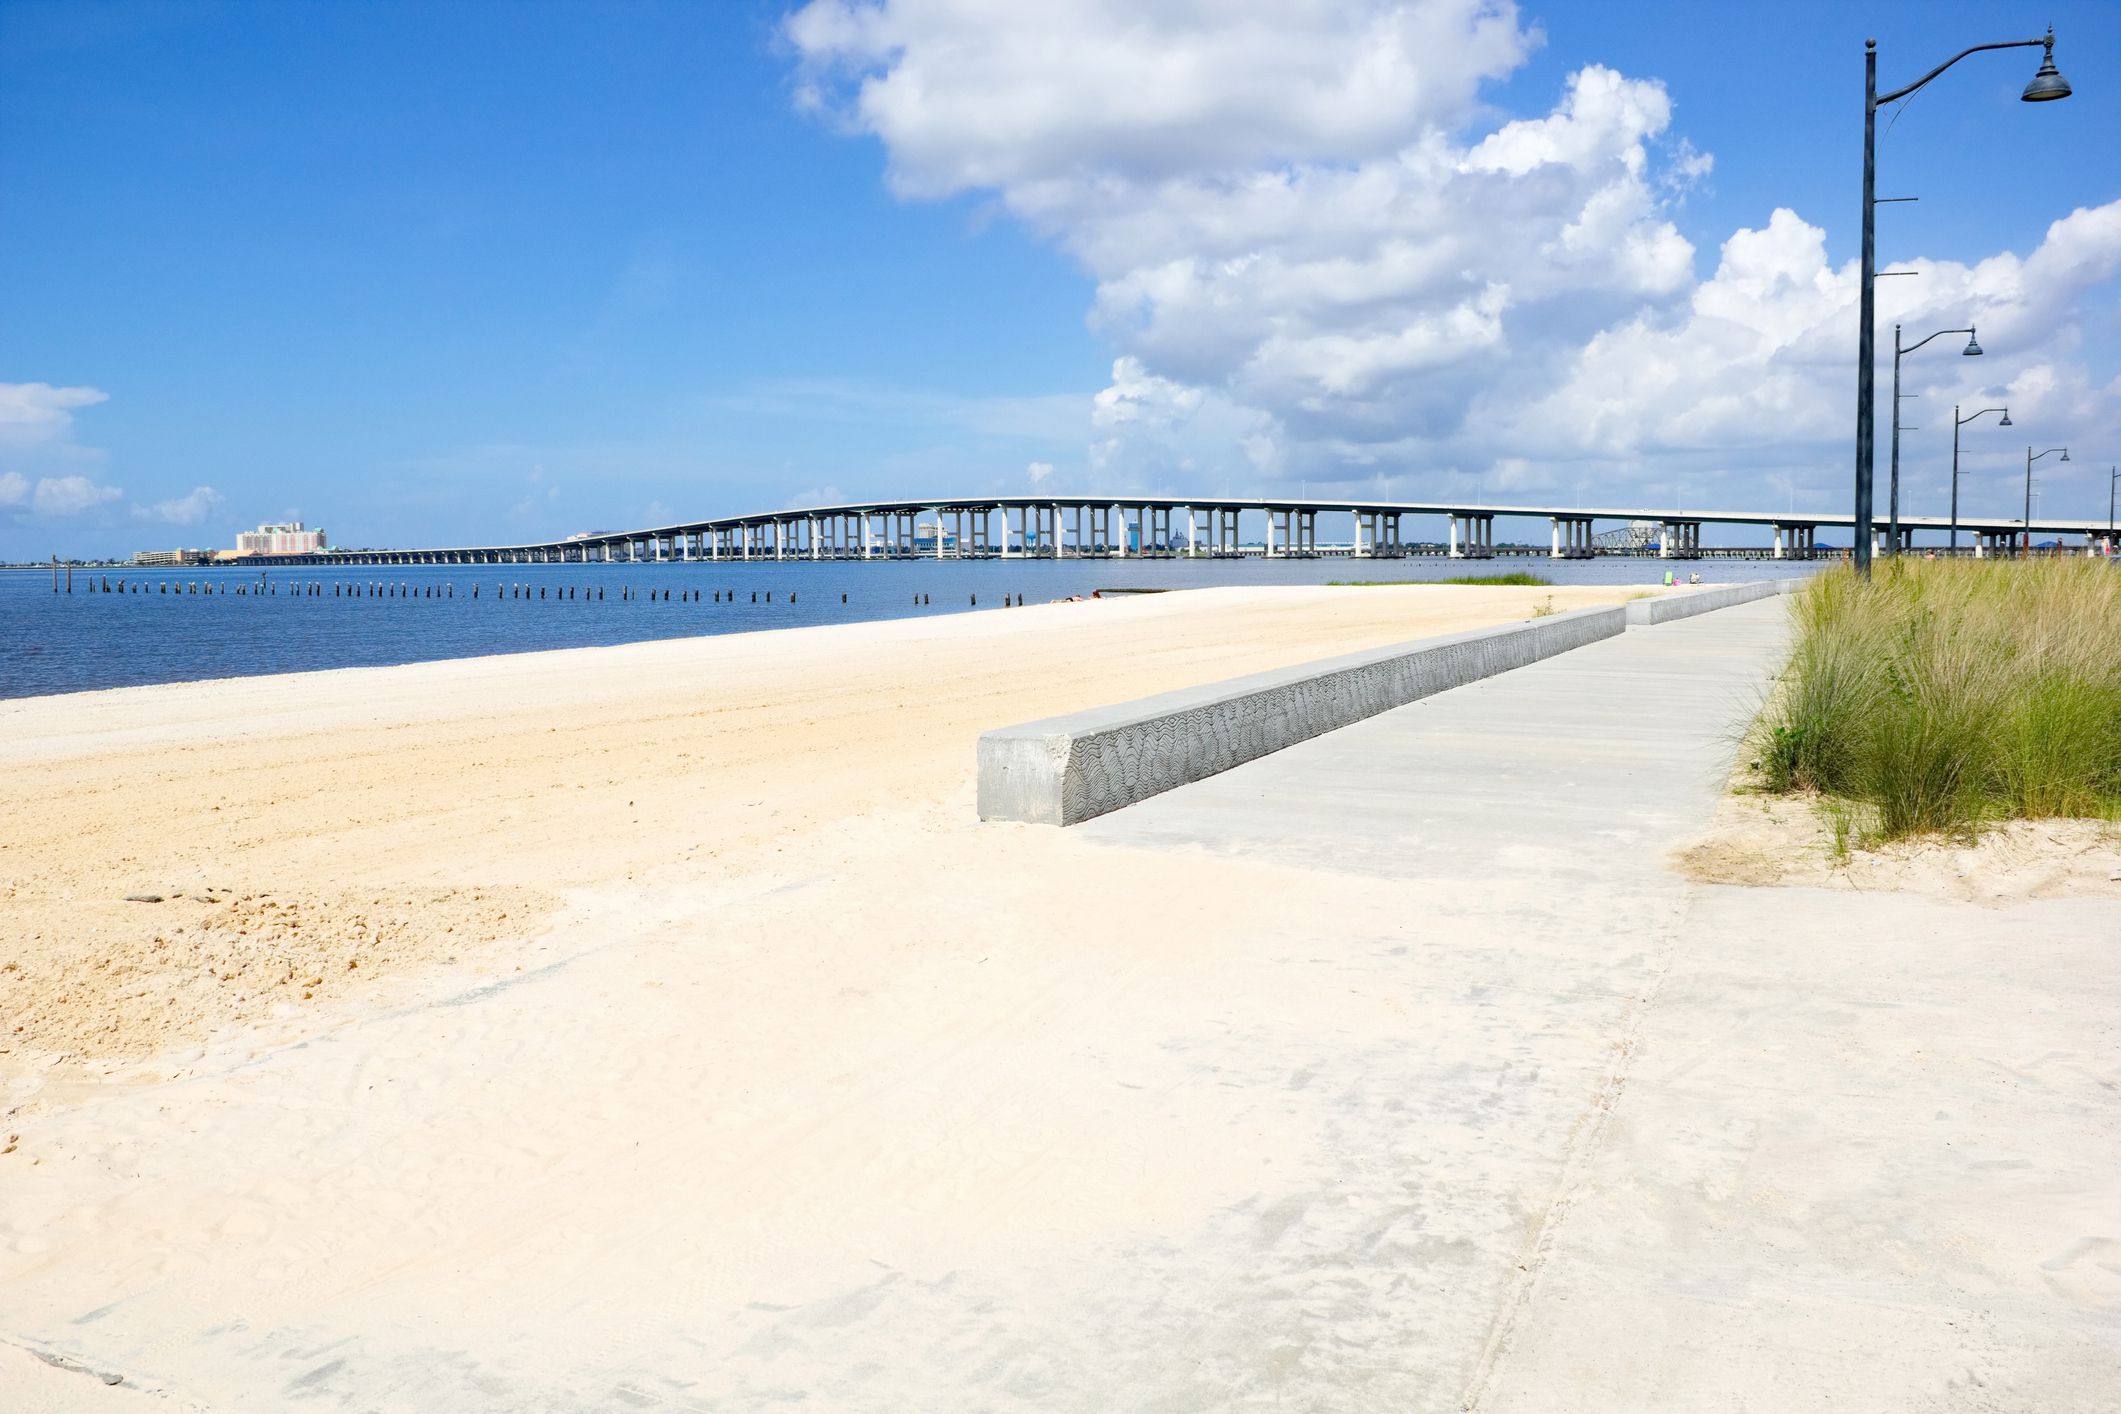 <p>Always dreamed of raising your family by the water? With its prime location on the Biloxi Bay and walkable downtown area, Ocean Springs may just be the ticket. Parents will especially appreciate its well-respected schools.</p><ul><li>Population: 18,662</li><li>Median Household Income: $63,653</li><li>Cost of Living: 88.2% of U.S. average</li><li>Median Rent Price: $2,000</li><li>Home Price-to-Income Ratio: 2.9</li><li>Average Property Tax: 1.17%</li></ul><p class="padding-top-ms u-margin-bottom-ms"><b>Housing Affordability:</b> Compared to other parts of the state, rent in Ocean Springs is on the higher side ($2,000). Home ownership is on the higher end as well — the median value is $184,800. But on the plus side, the town’s median household income is significantly higher than the state’s ($63,653 vs. $49,111).</p><p class="padding-top-ms u-margin-bottom-ms"><b><i>(Learn more: <a href="https://www.sofi.com/personal-loan-calculator/">Personal Loan Calculator</a>)</i></b></p>